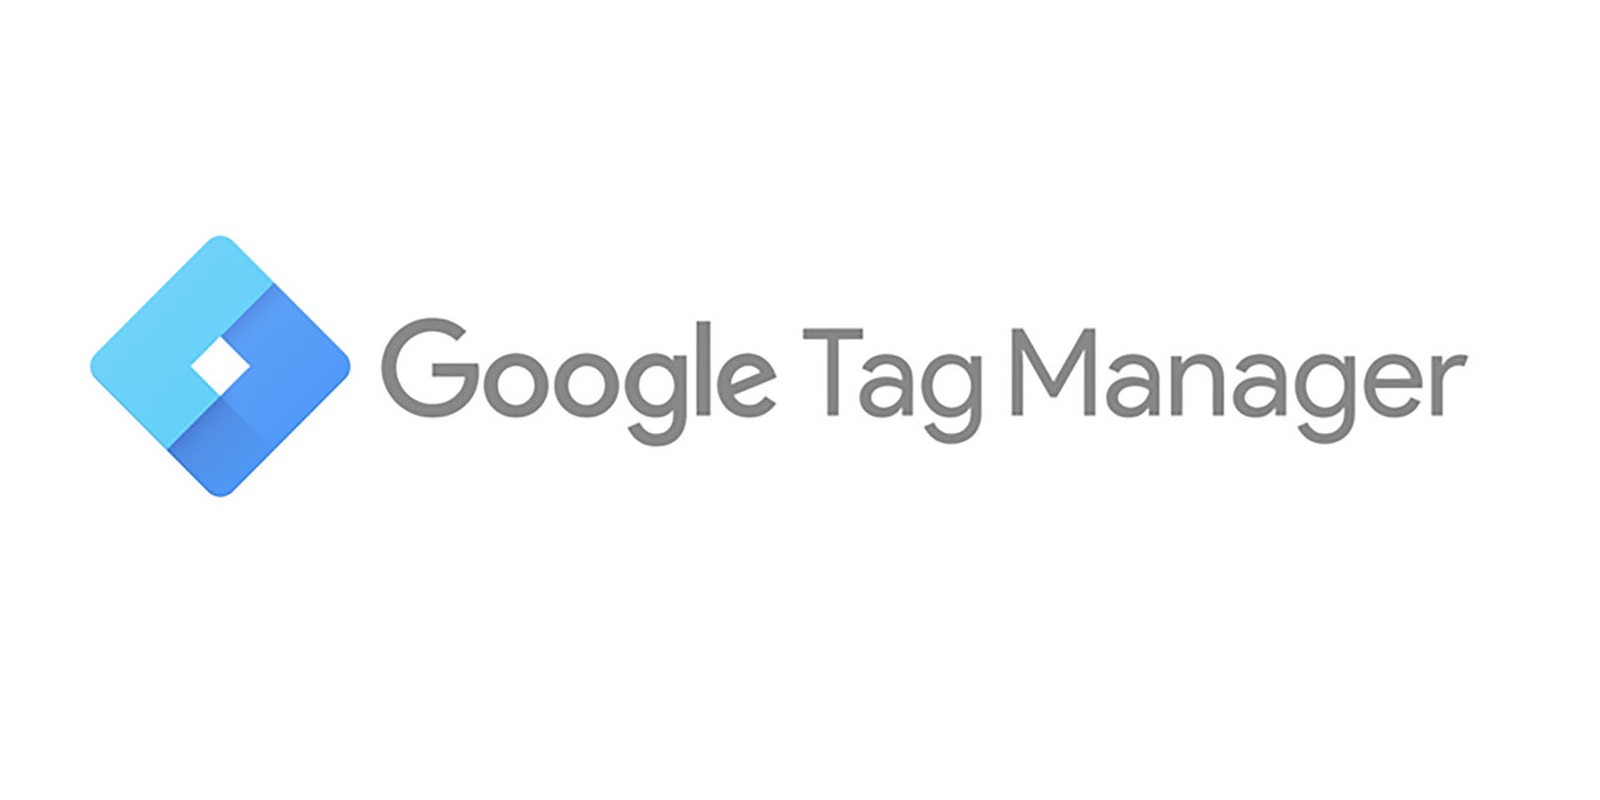 How to Apply Event Tracking on Custom Forms With Google Tag Manager